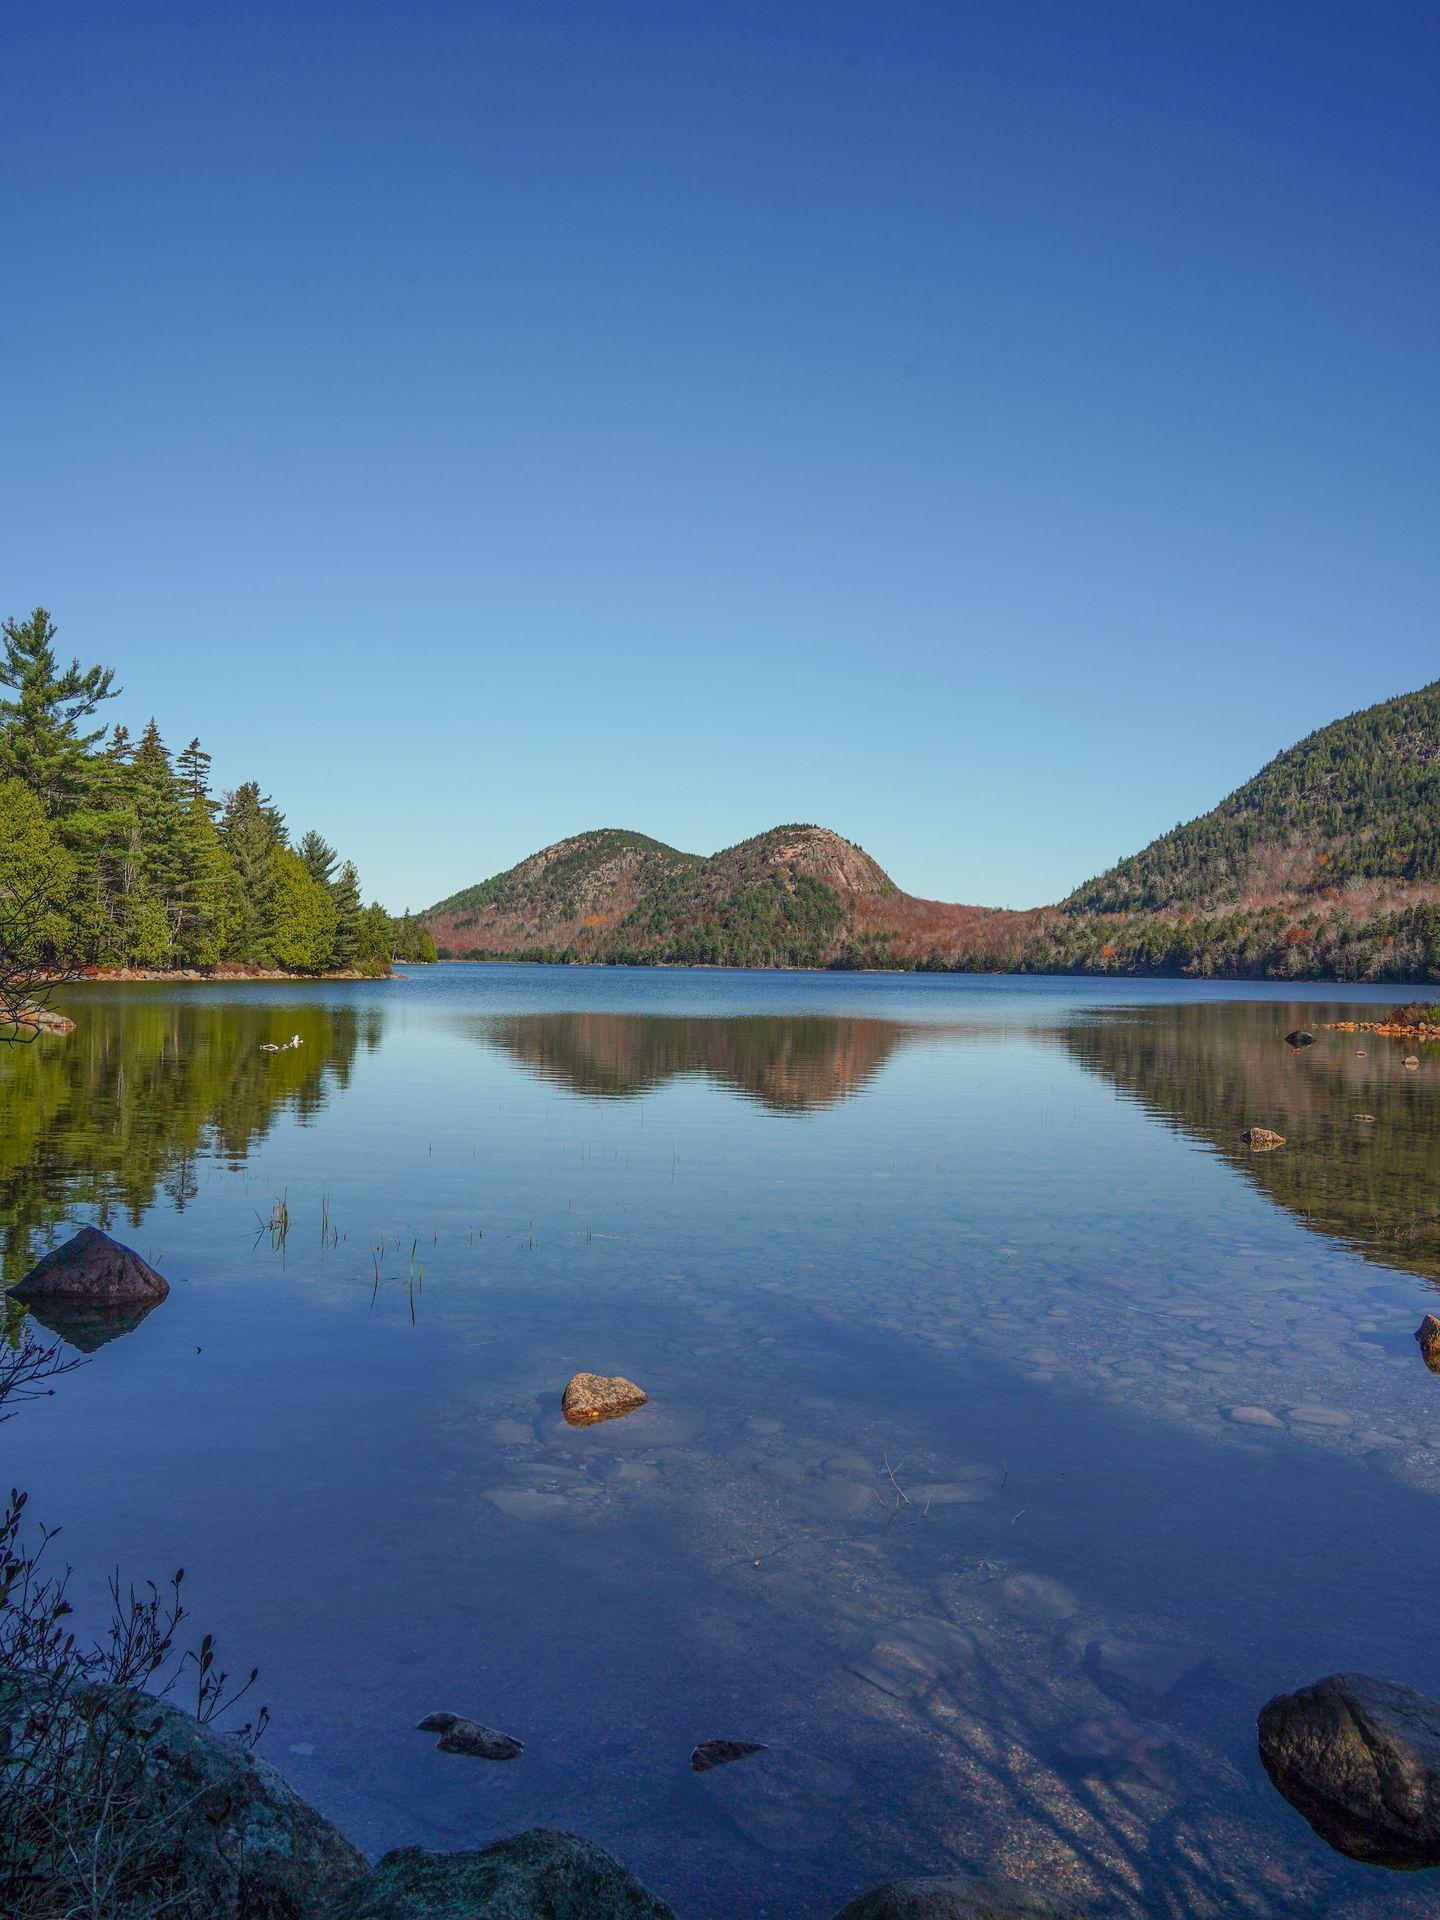 Looking across Jordan Pond at two round mountains reflecting in the water.